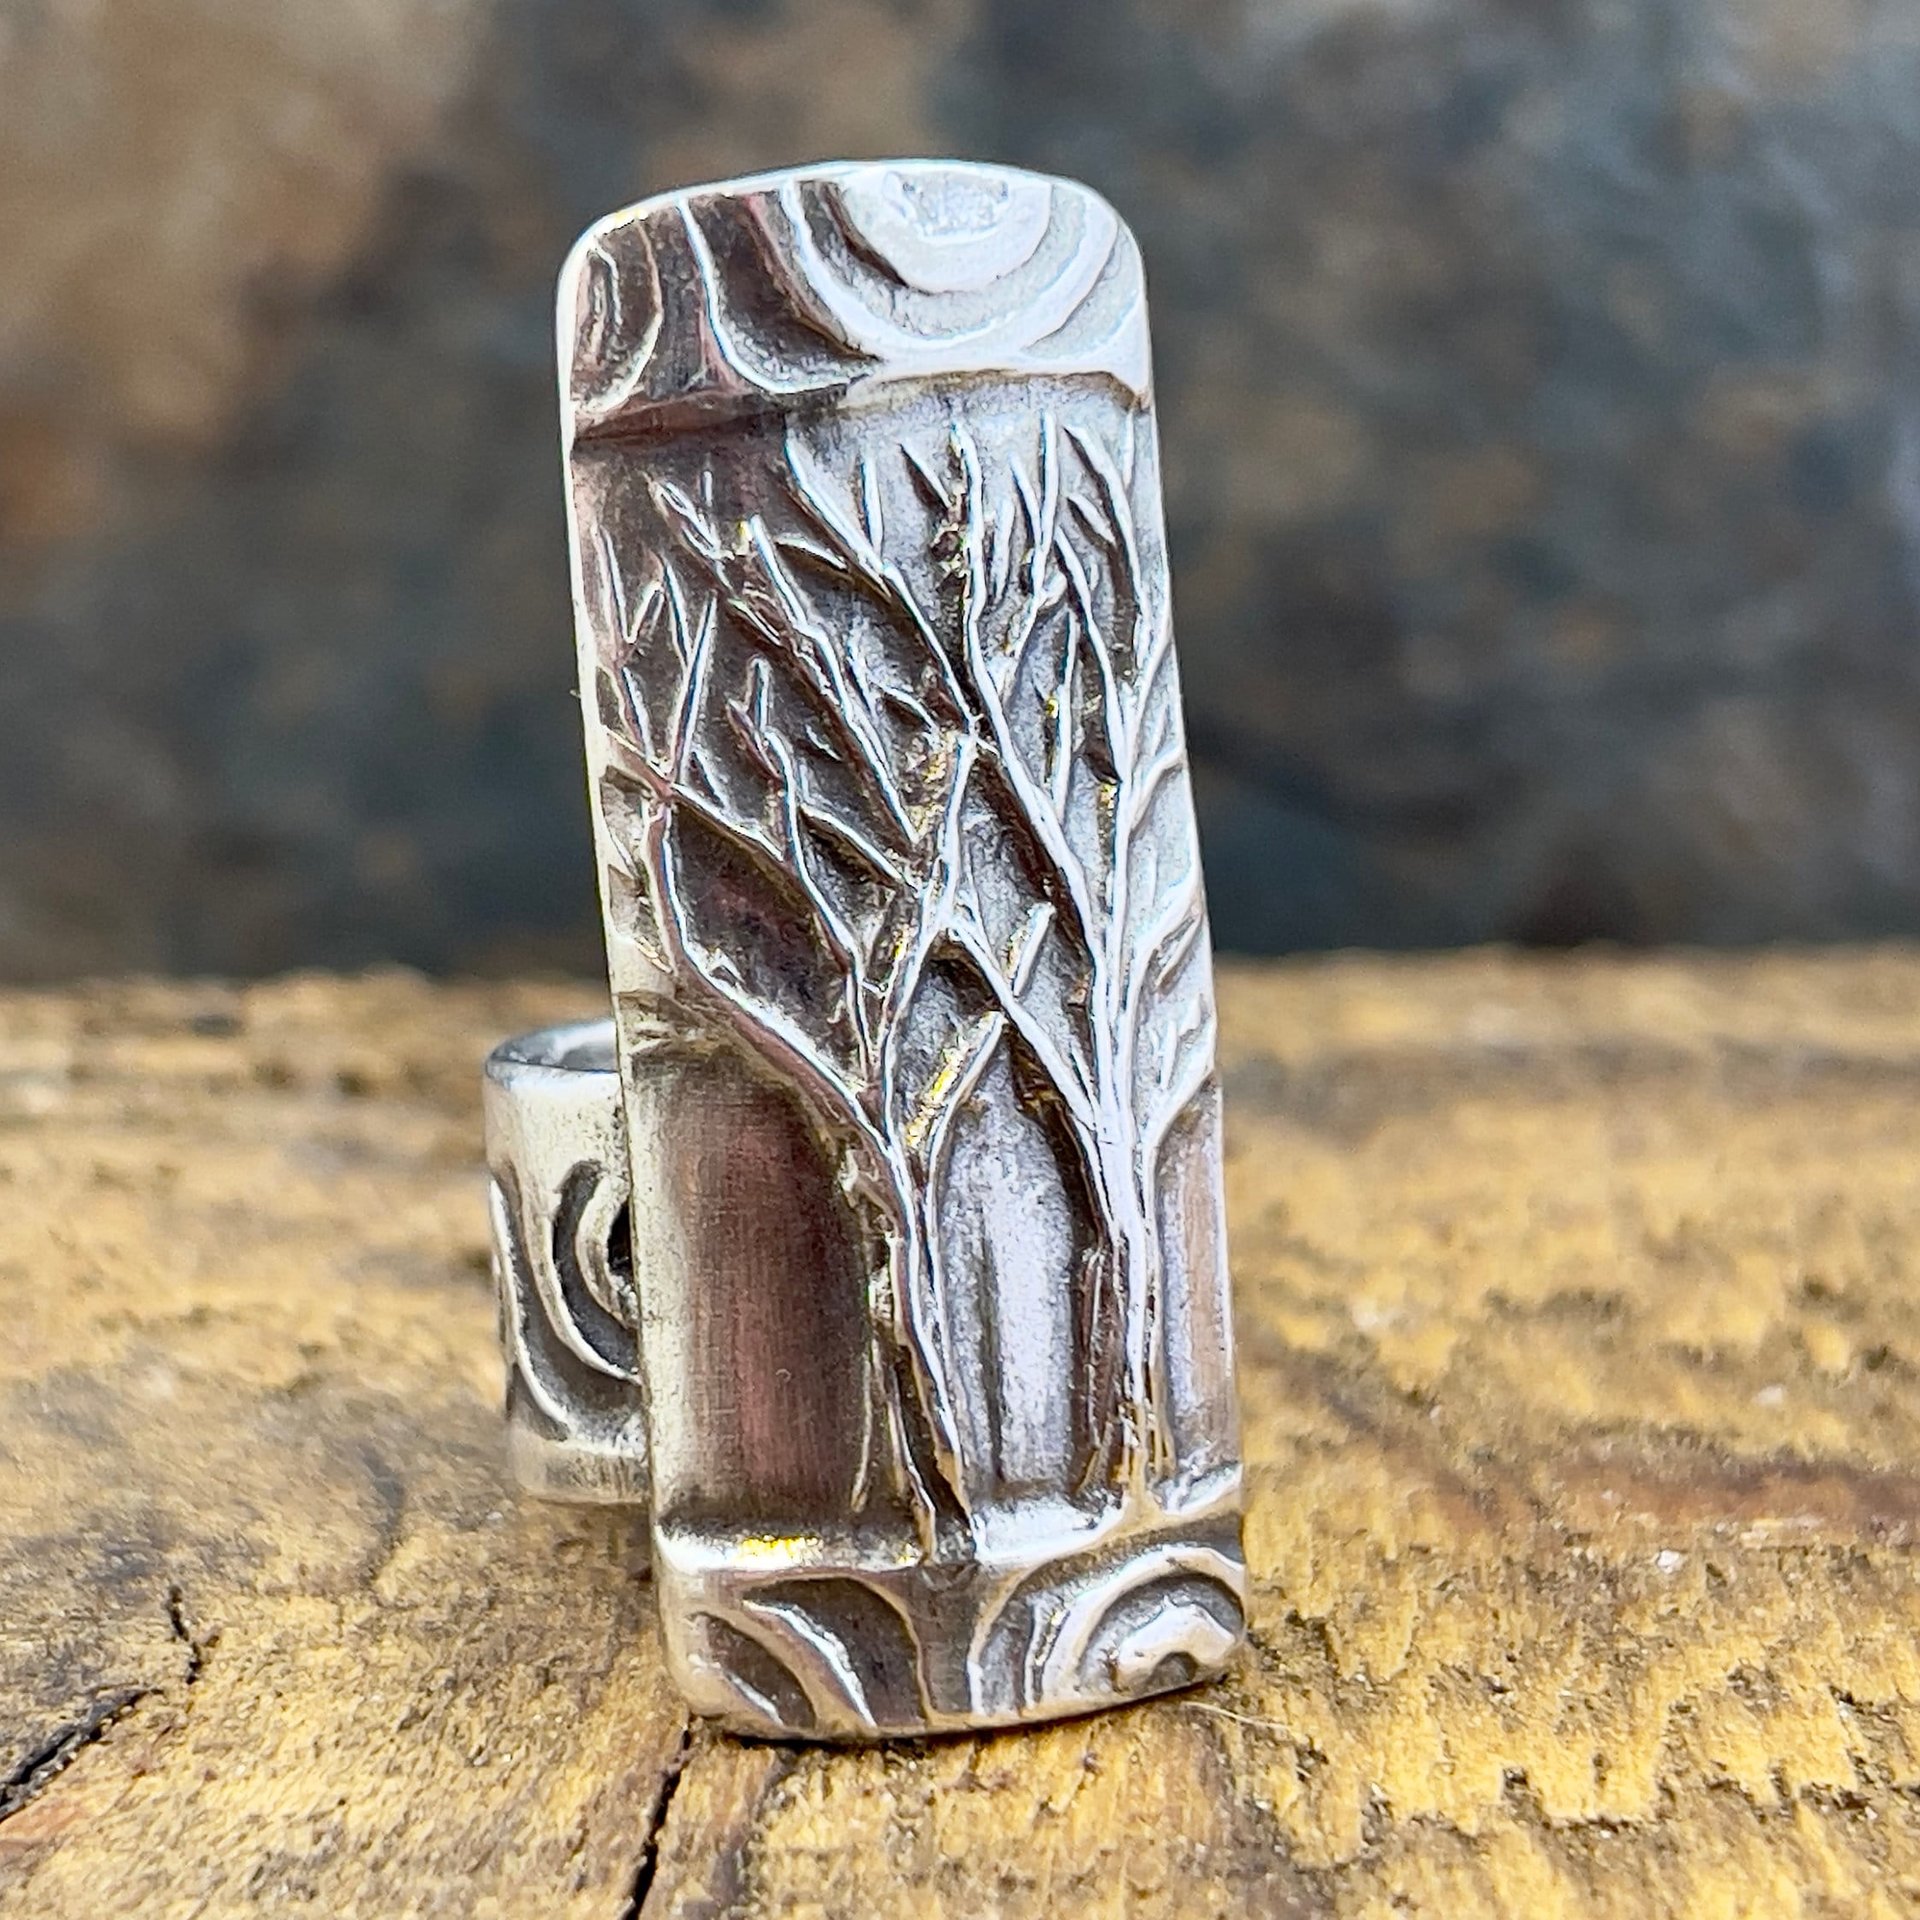 Silver Tree Ring, Sterling Silver 960, Two Trees, Irish Celtic Spirals, Shied Ring, Statement Jewelry, Druid Pagan, Earthy Rustic Jewelry